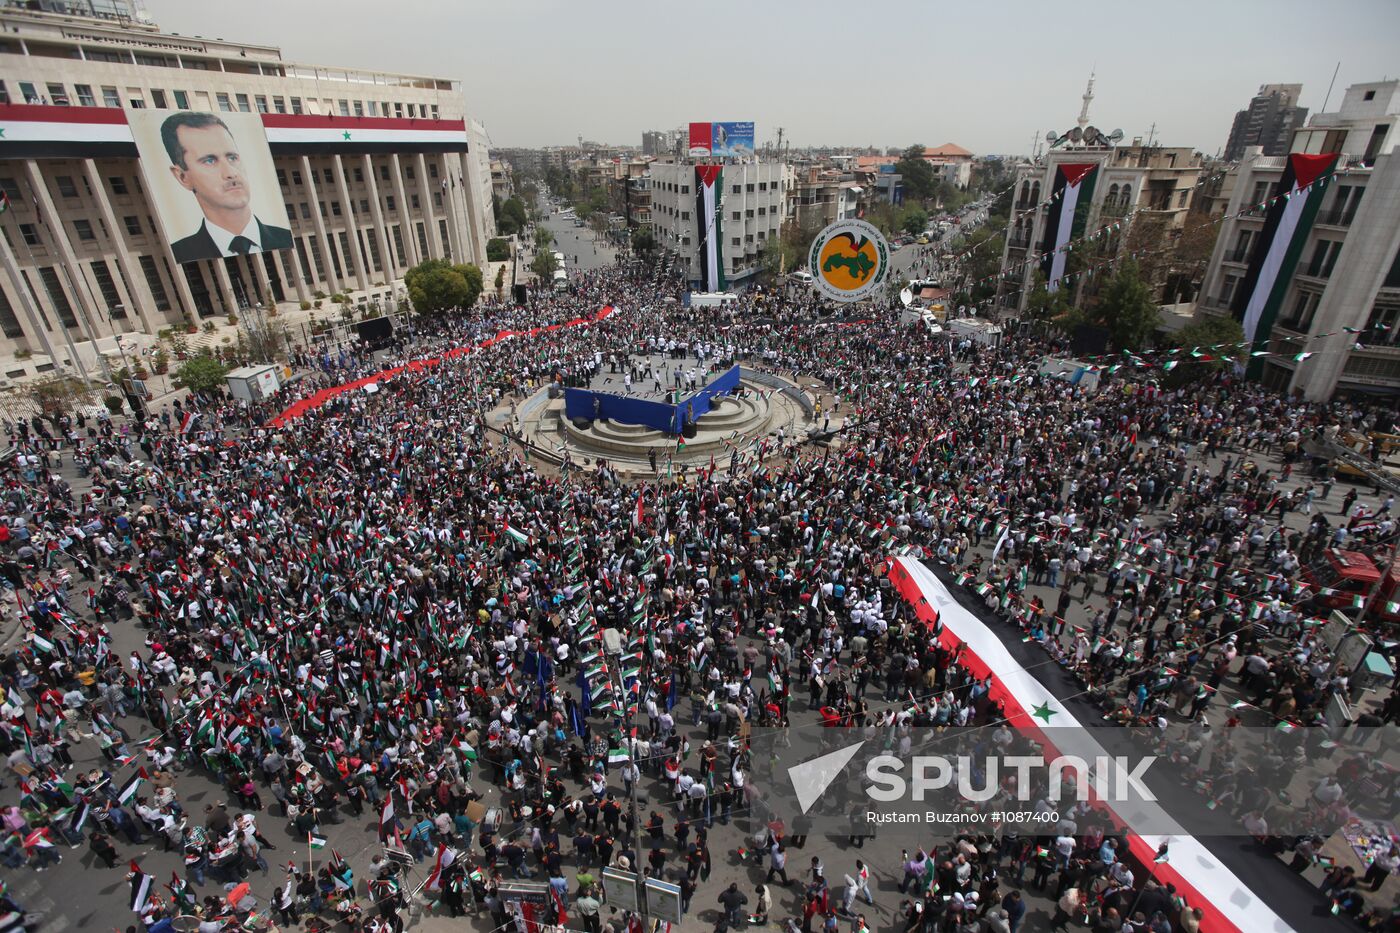 Rally in support of authorities in Syria